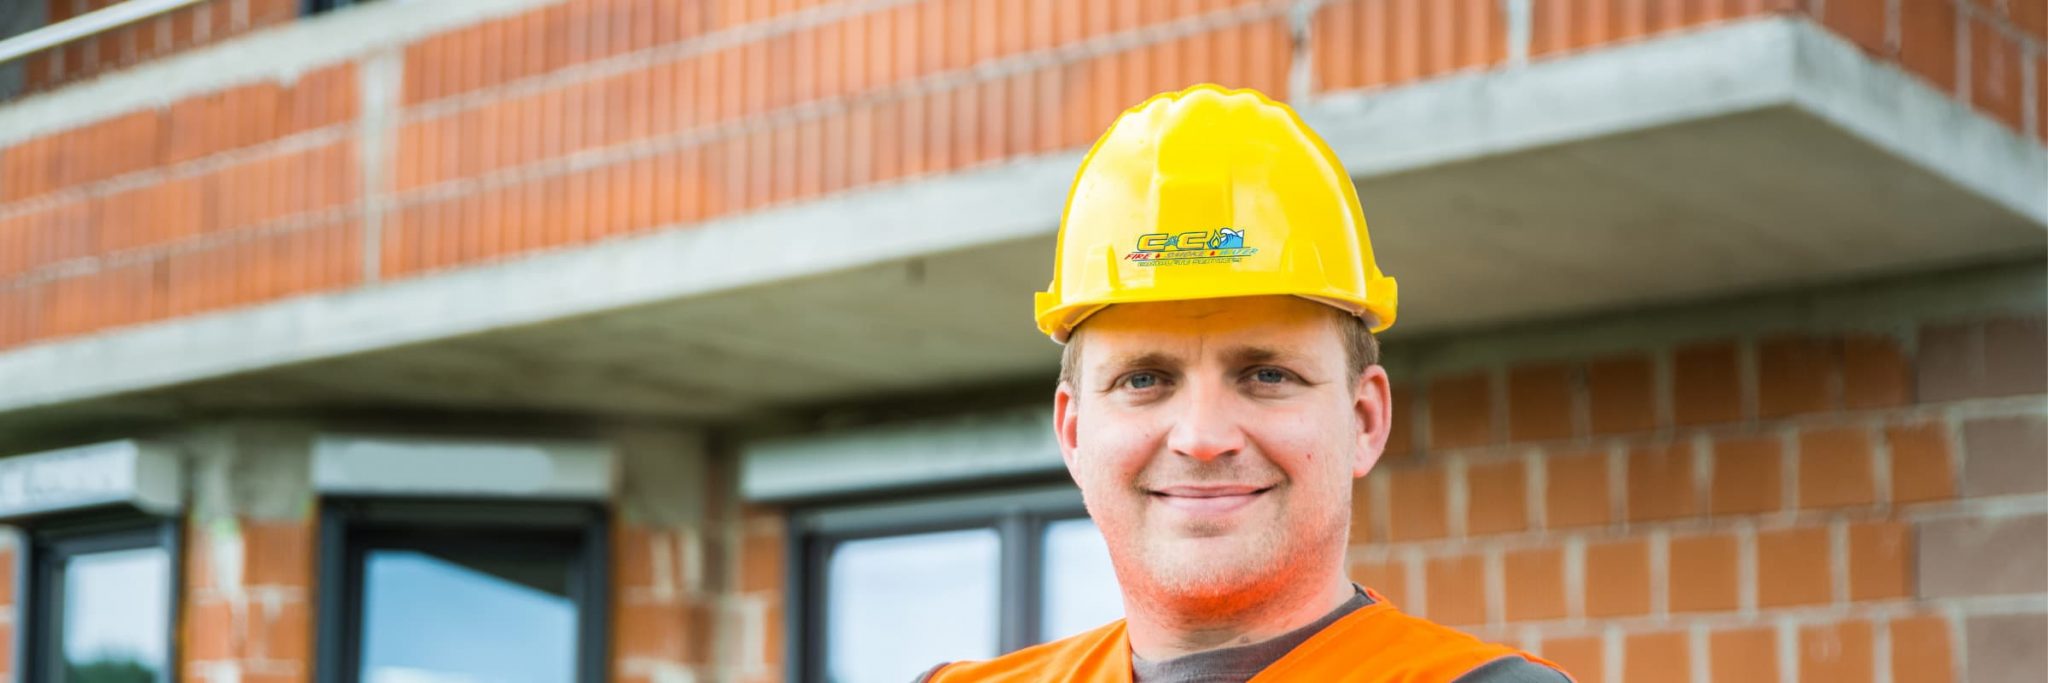 A man wearing a hard hat with the C&C logo